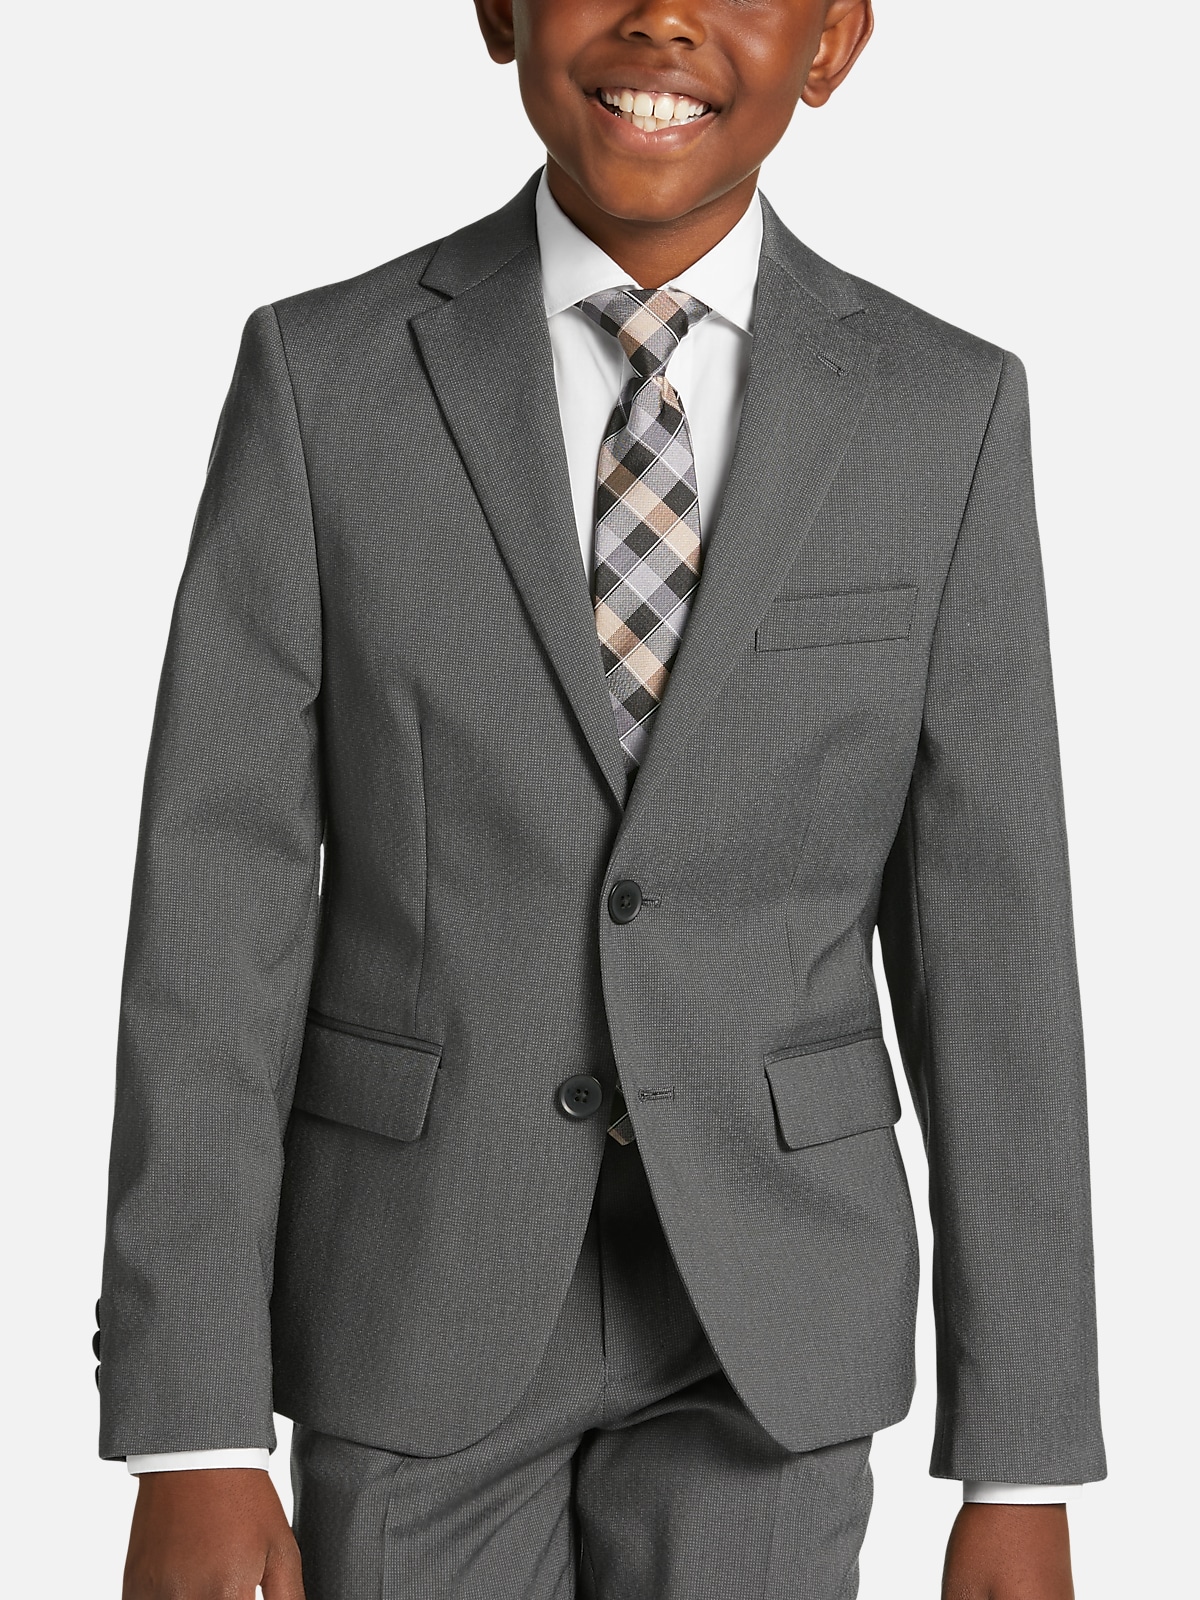 Michael Strahan Boys Suit Separates Jacket | All Clearance $39.99| Men ...